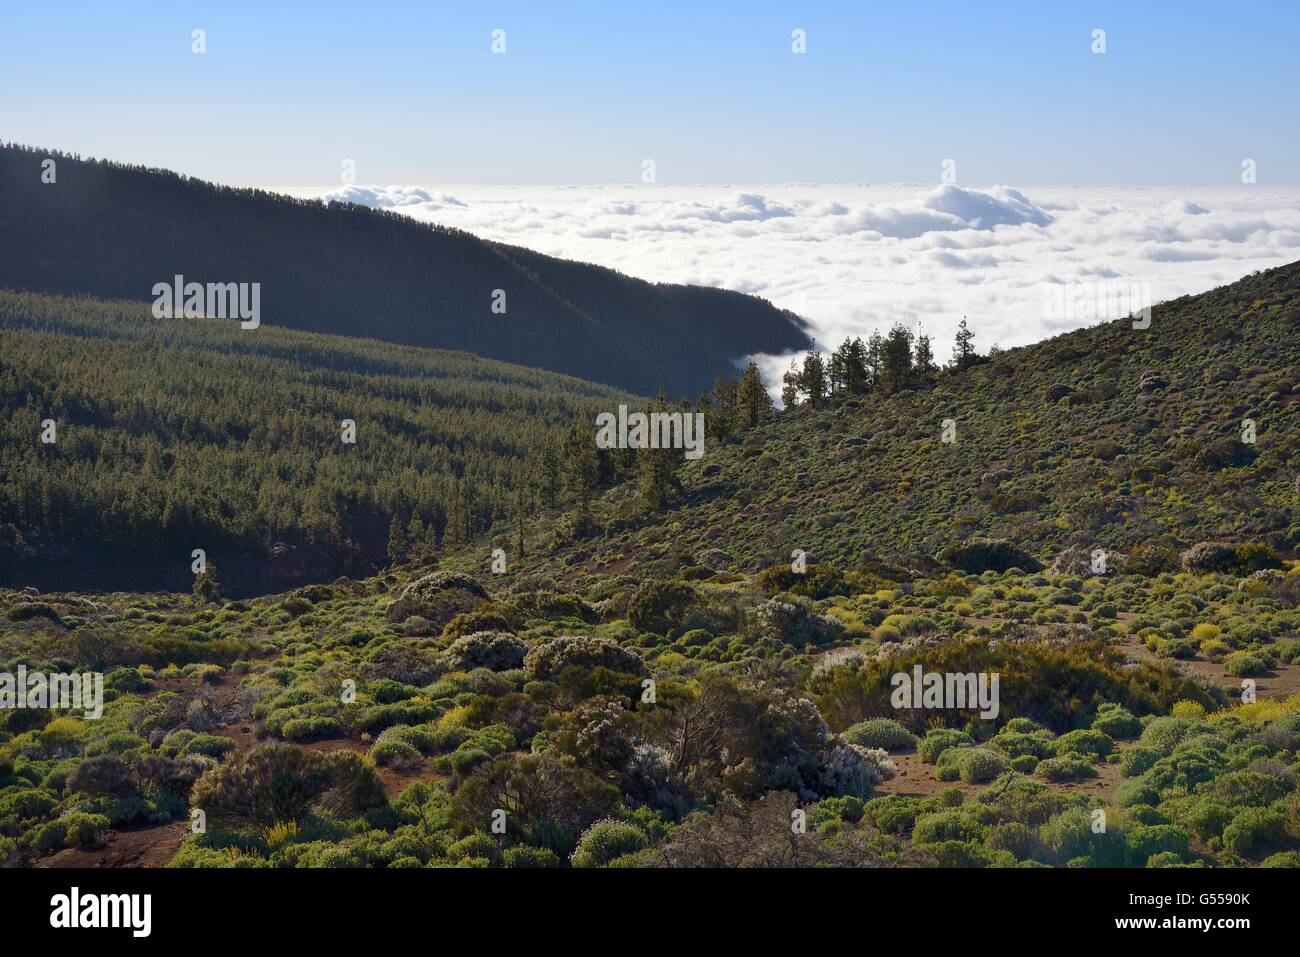 Sea of cloud lapping around the highlands of Tenerife, clothed with dense forests of Canary Island pine and endemic scrub bushes Stock Photo